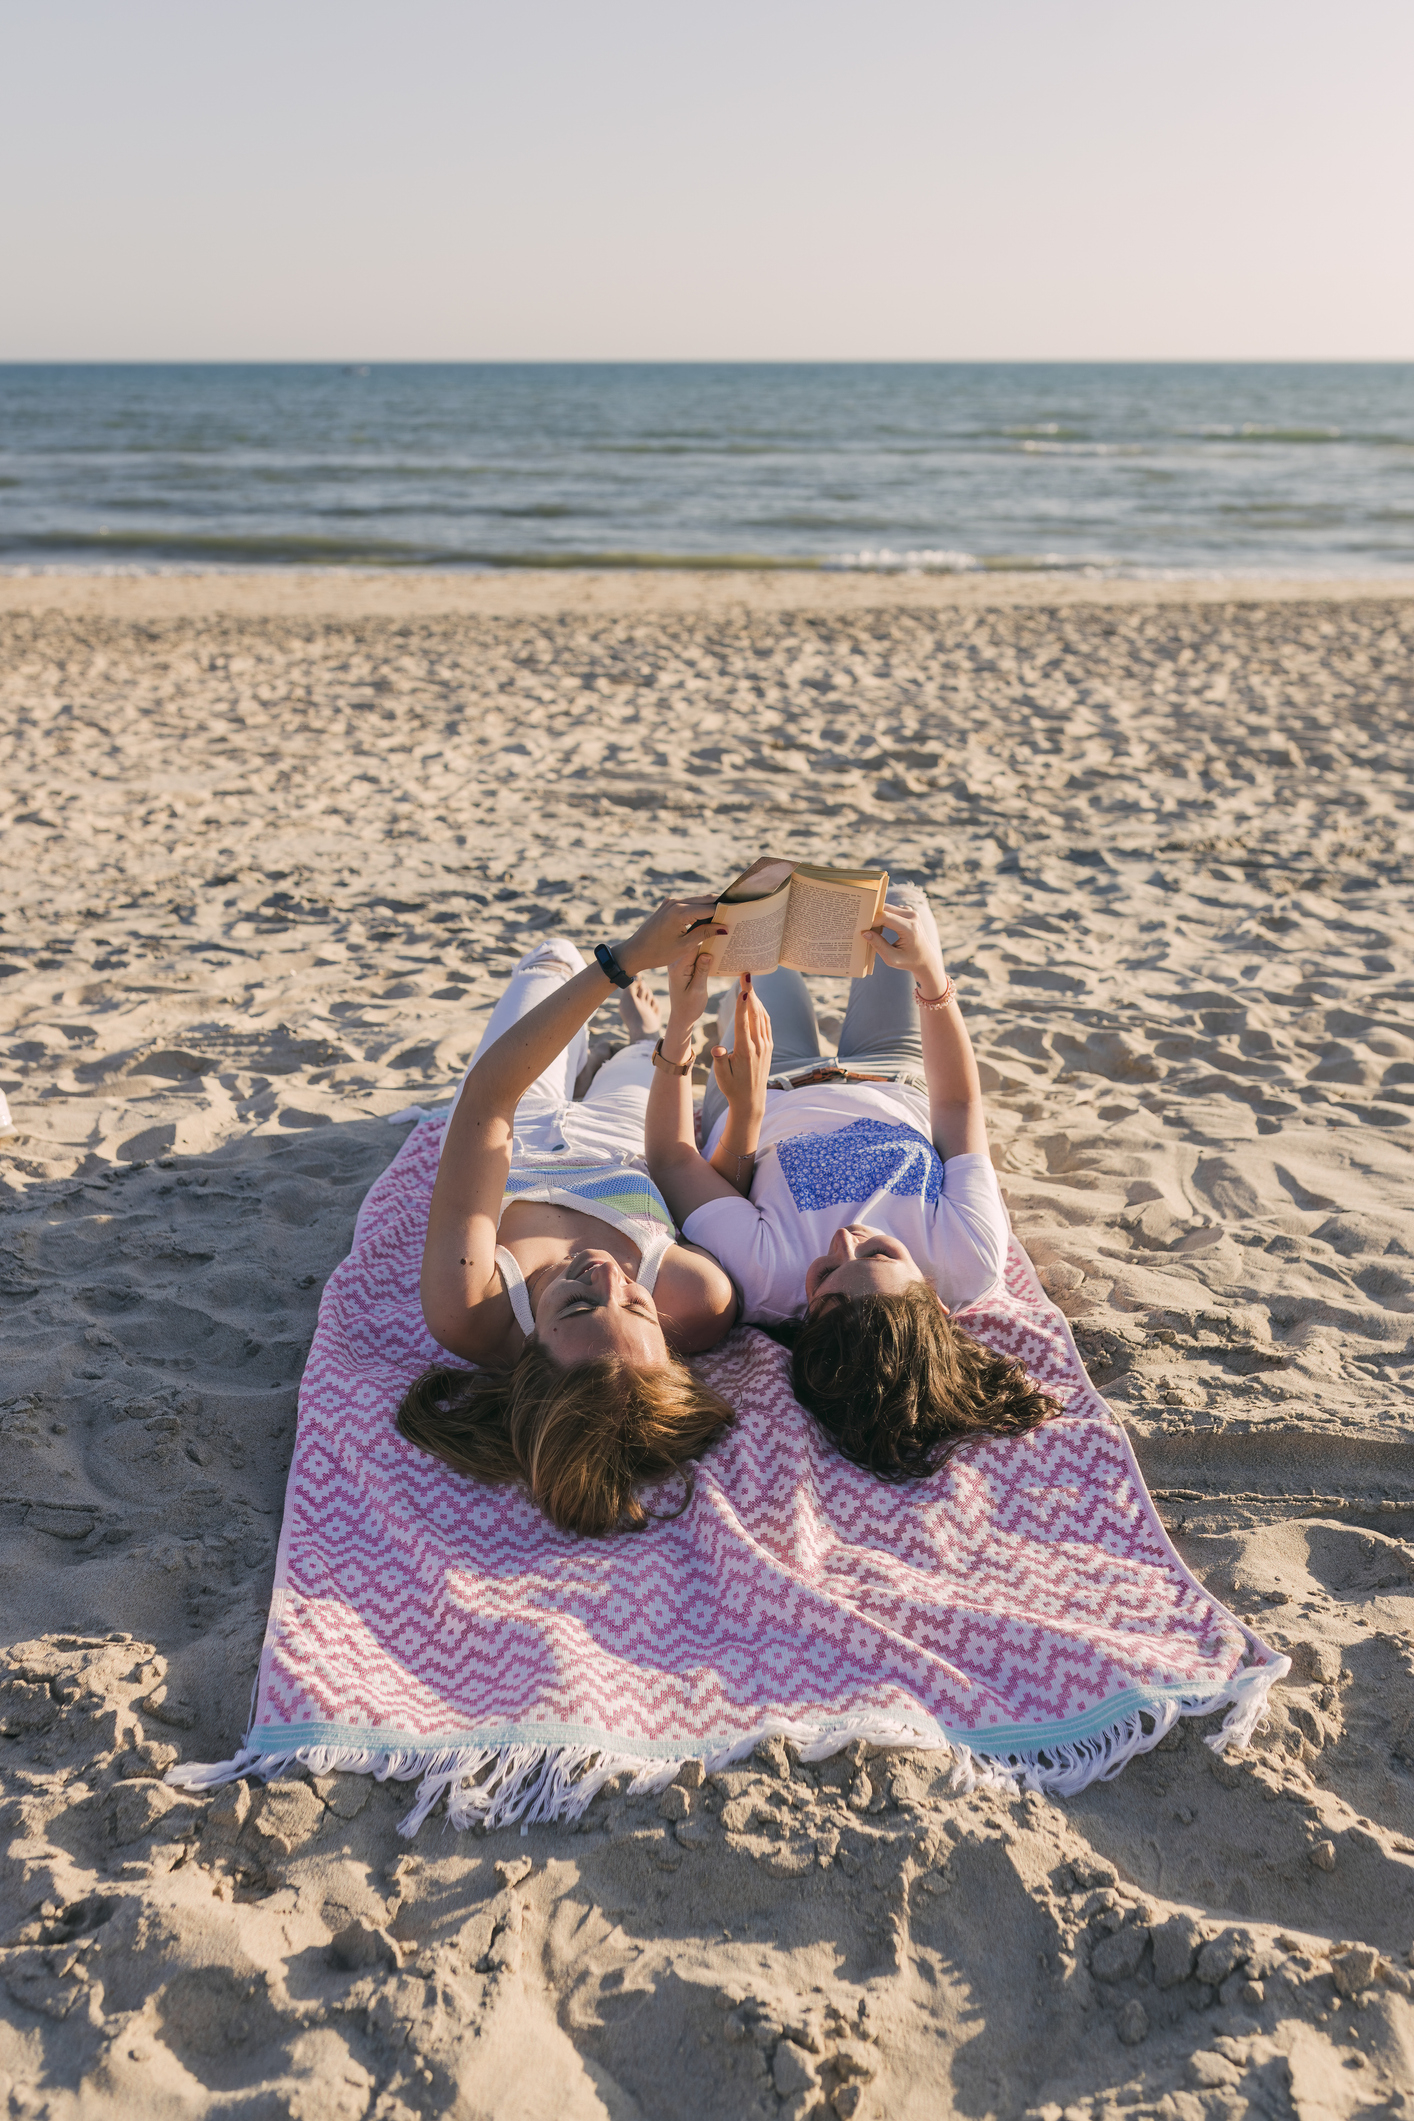 Two individuals lying on a beach towel, one holding a book over both their heads